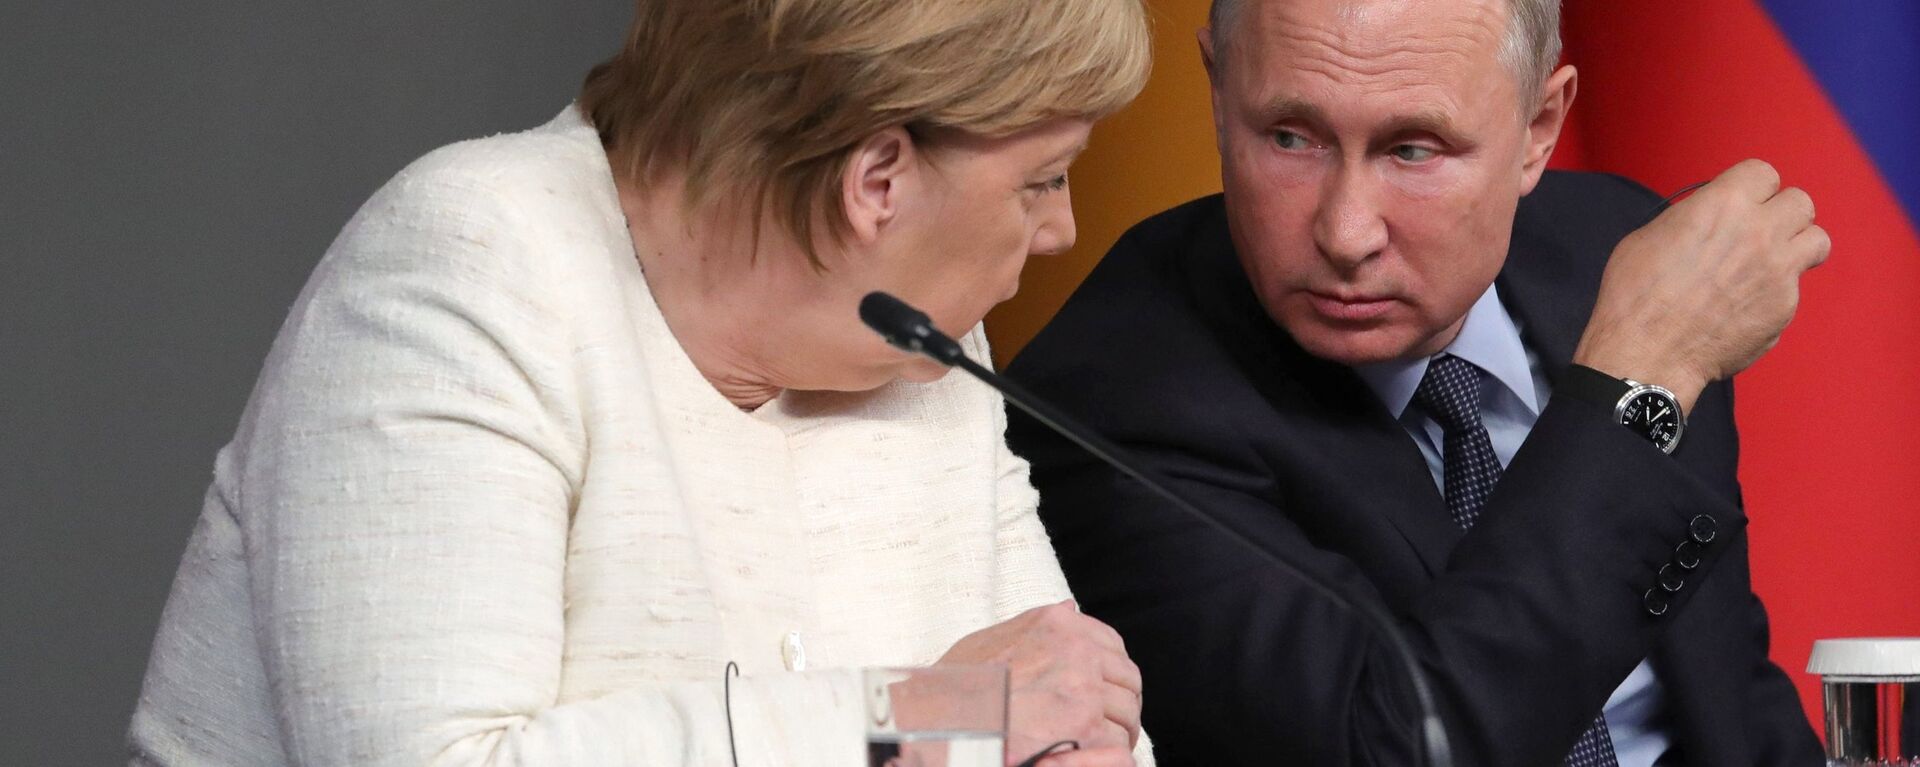 Russian President Vladimir Putin and German Chancellor Angela Merkel during a press conference following the Russia-France-Germany-Turkey summit on Syria in Istanbul on October 27, 2018. - Sputnik International, 1920, 08.05.2020